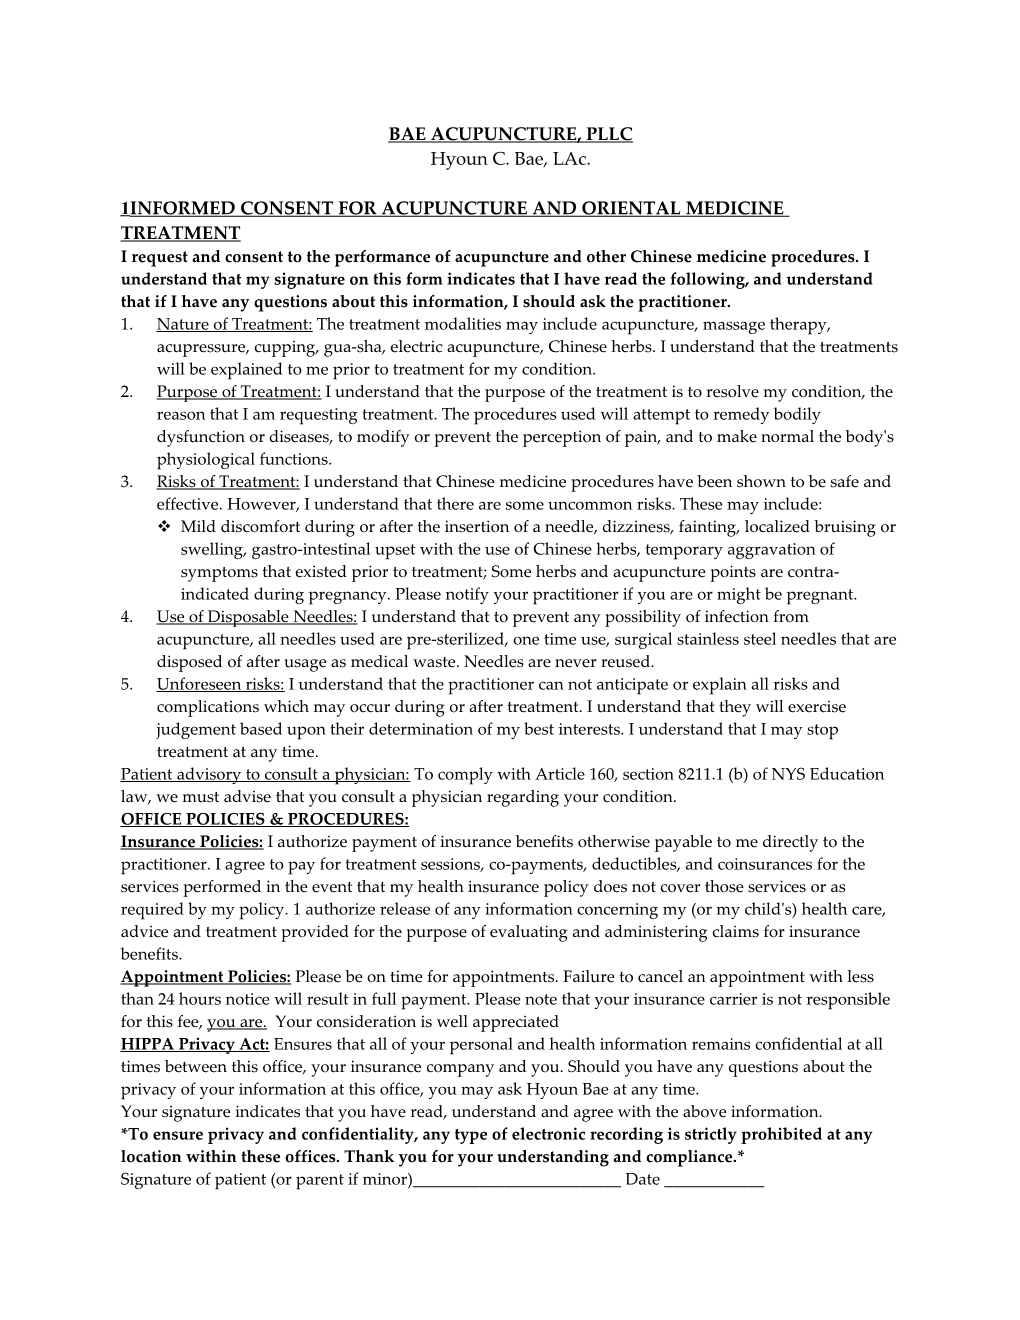 Informed Consent for Acupuncture and Oriental Medicine Treatment